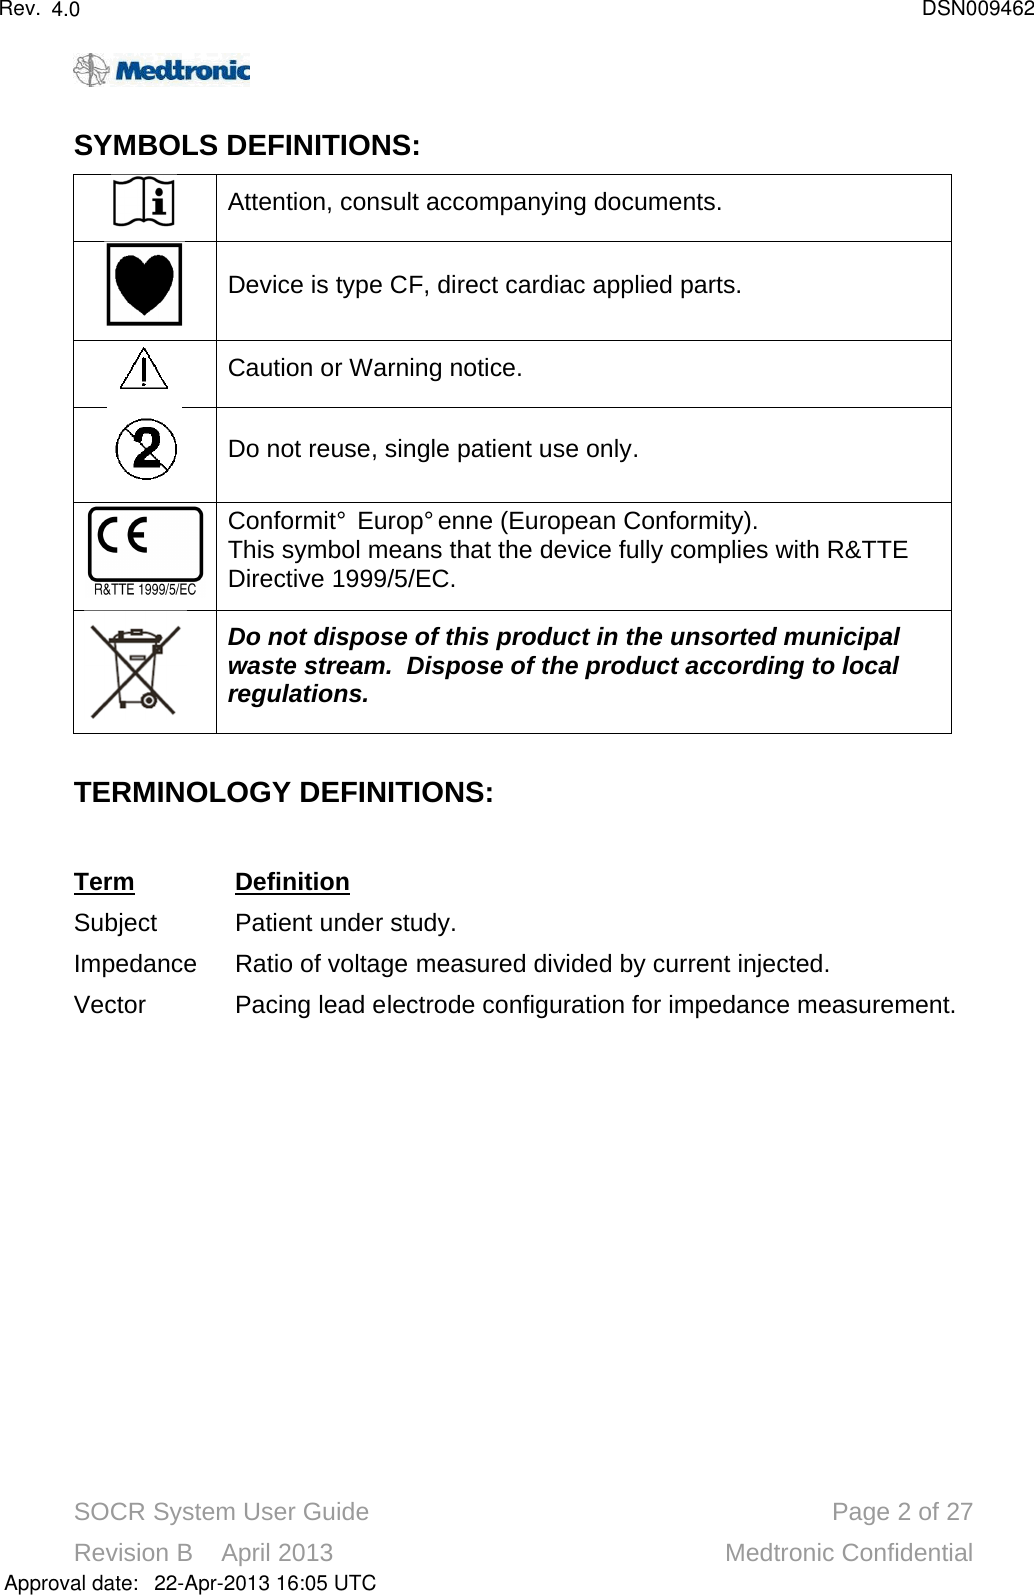 SOCR System User Guide Page 2of 27Revision B    April 2013 Medtronic ConfidentialSYMBOLS DEFINITIONS: Attention, consult accompanying documents.Device is type CF, direct cardiac applied parts.Caution or Warning notice.Do not reuse, single patient use only.ConformitéEuropéenne (European Conformity).This symbol means that the device fully complies with R&amp;TTEDirective 1999/5/EC.Do not dispose of this product in the unsorted municipal waste stream.  Dispose of the product according to local regulations.TERMINOLOGY DEFINITIONS: TermDefinitionSubject Patient under study.Impedance Ratio of voltage measured divided by current injected.Vector Pacing lead electrode configuration for impedance measurement.Approval date:4.0 DSN00946222-Apr-2013 16:05 UTCRev.